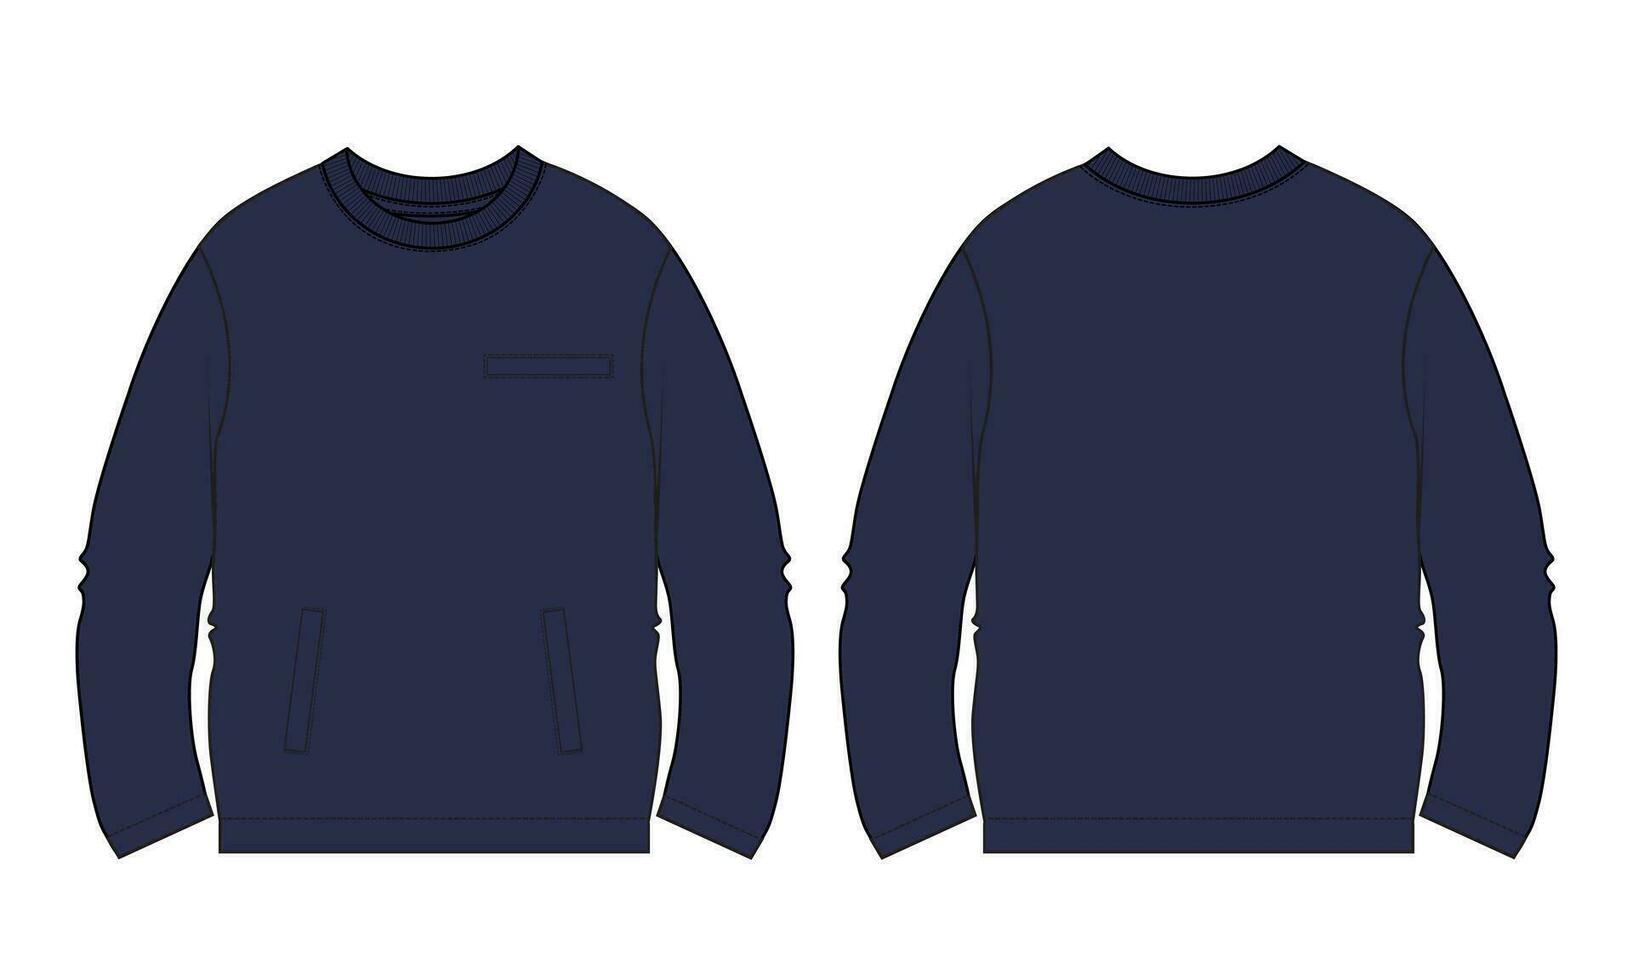 Long sleeve sweatshirt vector illustration template front and back views